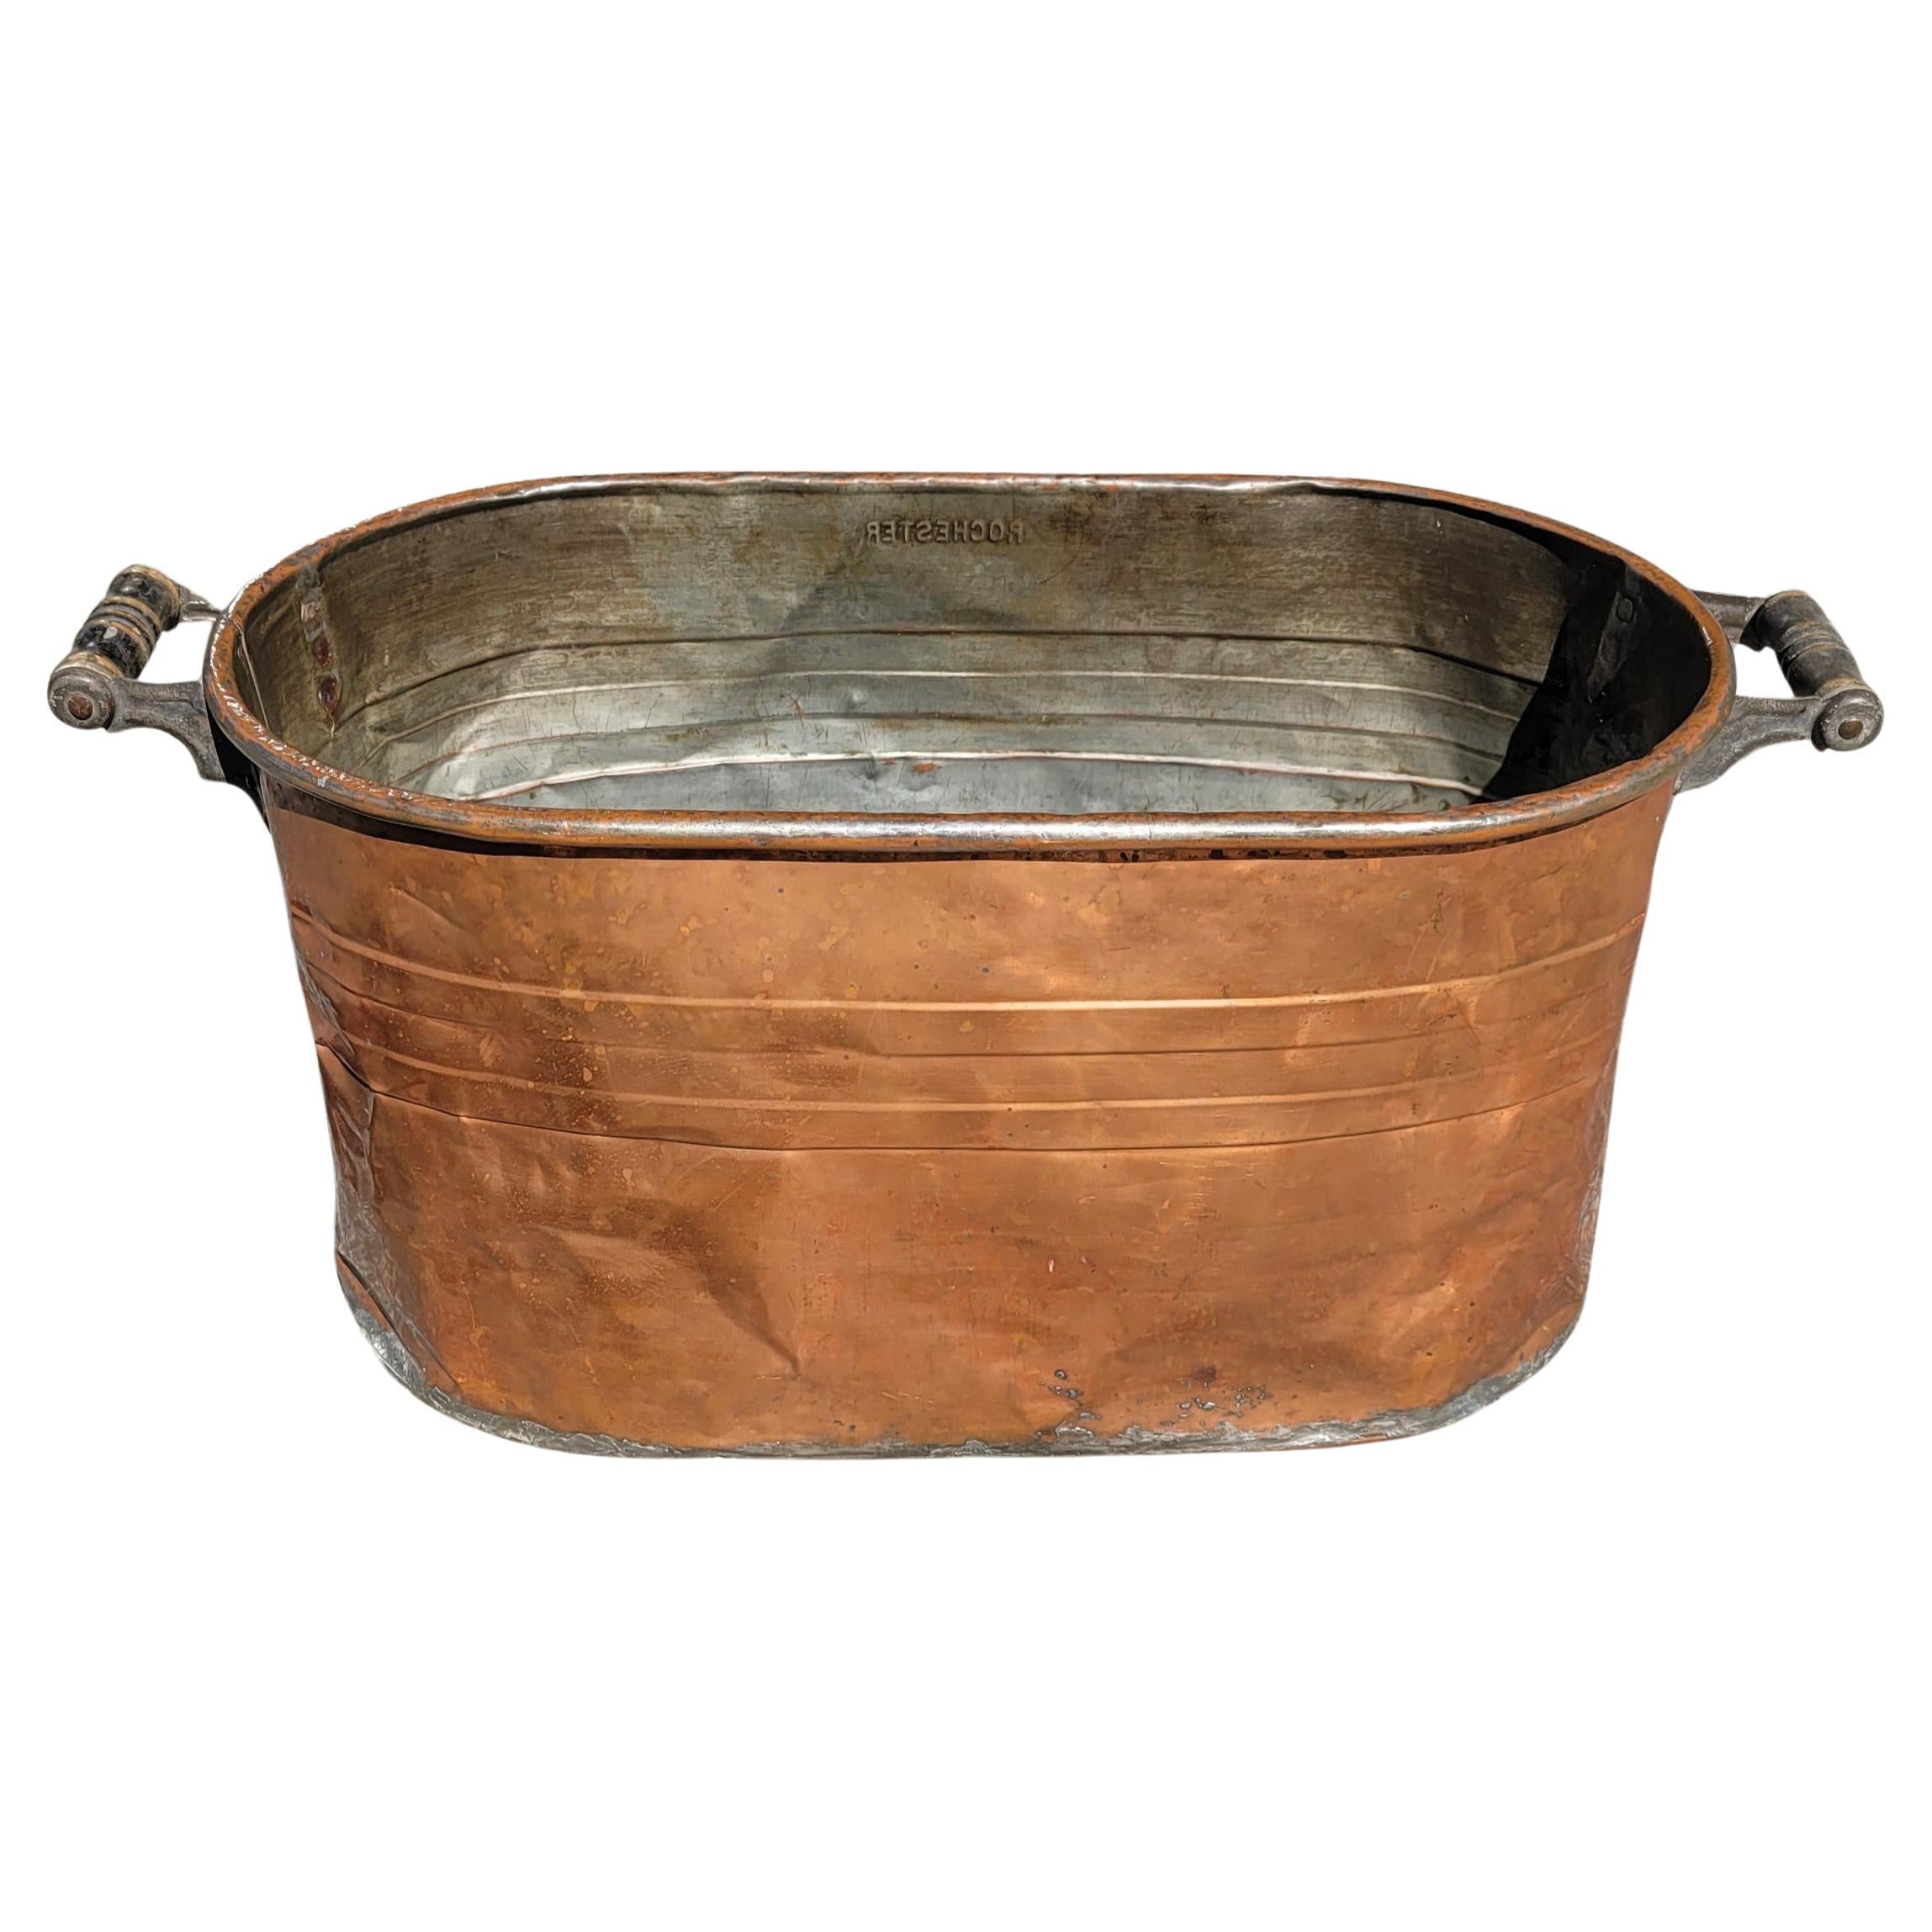 1920s, Copper Boiler Wash Tub Pot with Wood Handles as Planter